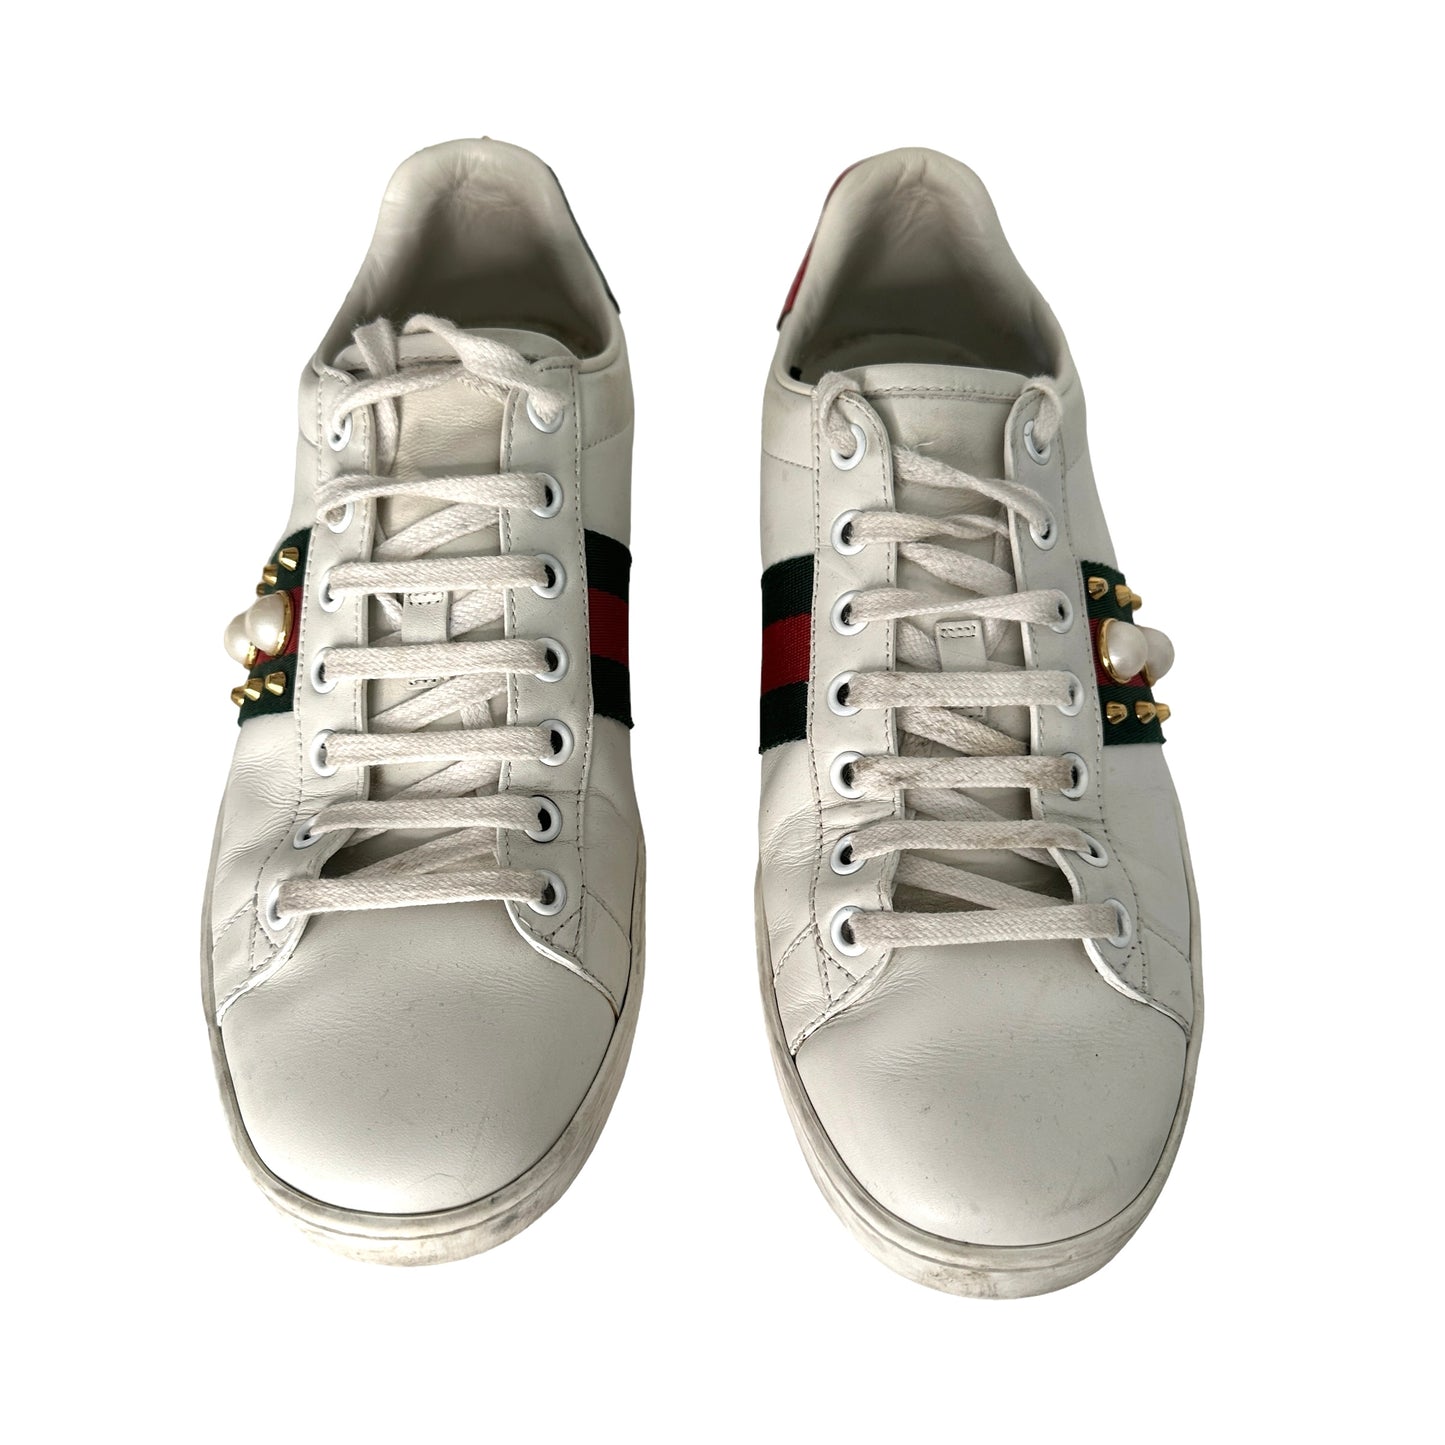 White Leather Sneakers - 8